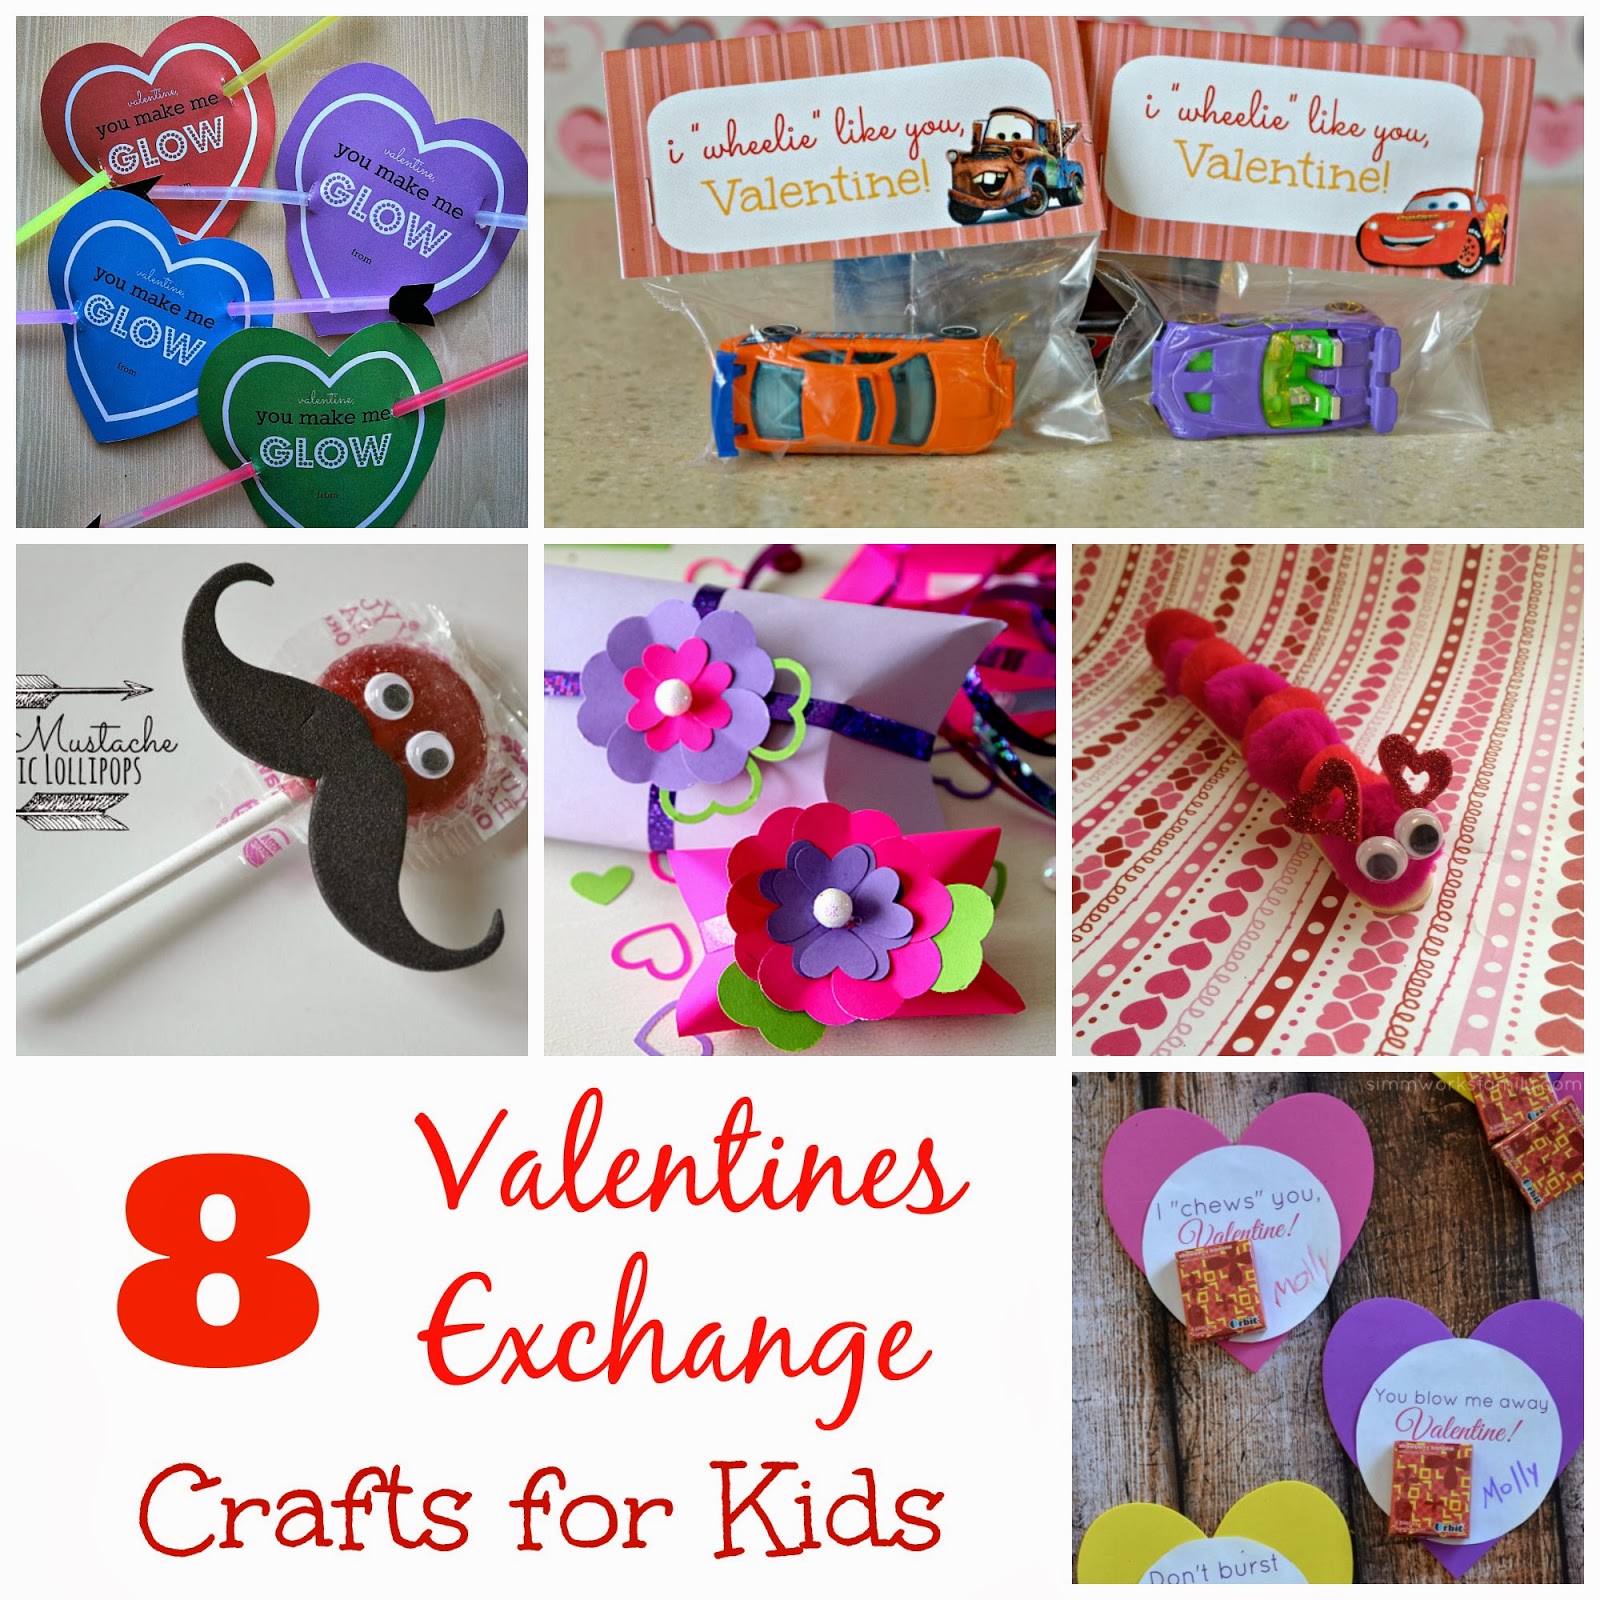 8 Valentines Exchange Crafts for Kids Outnumbered 3 to 1